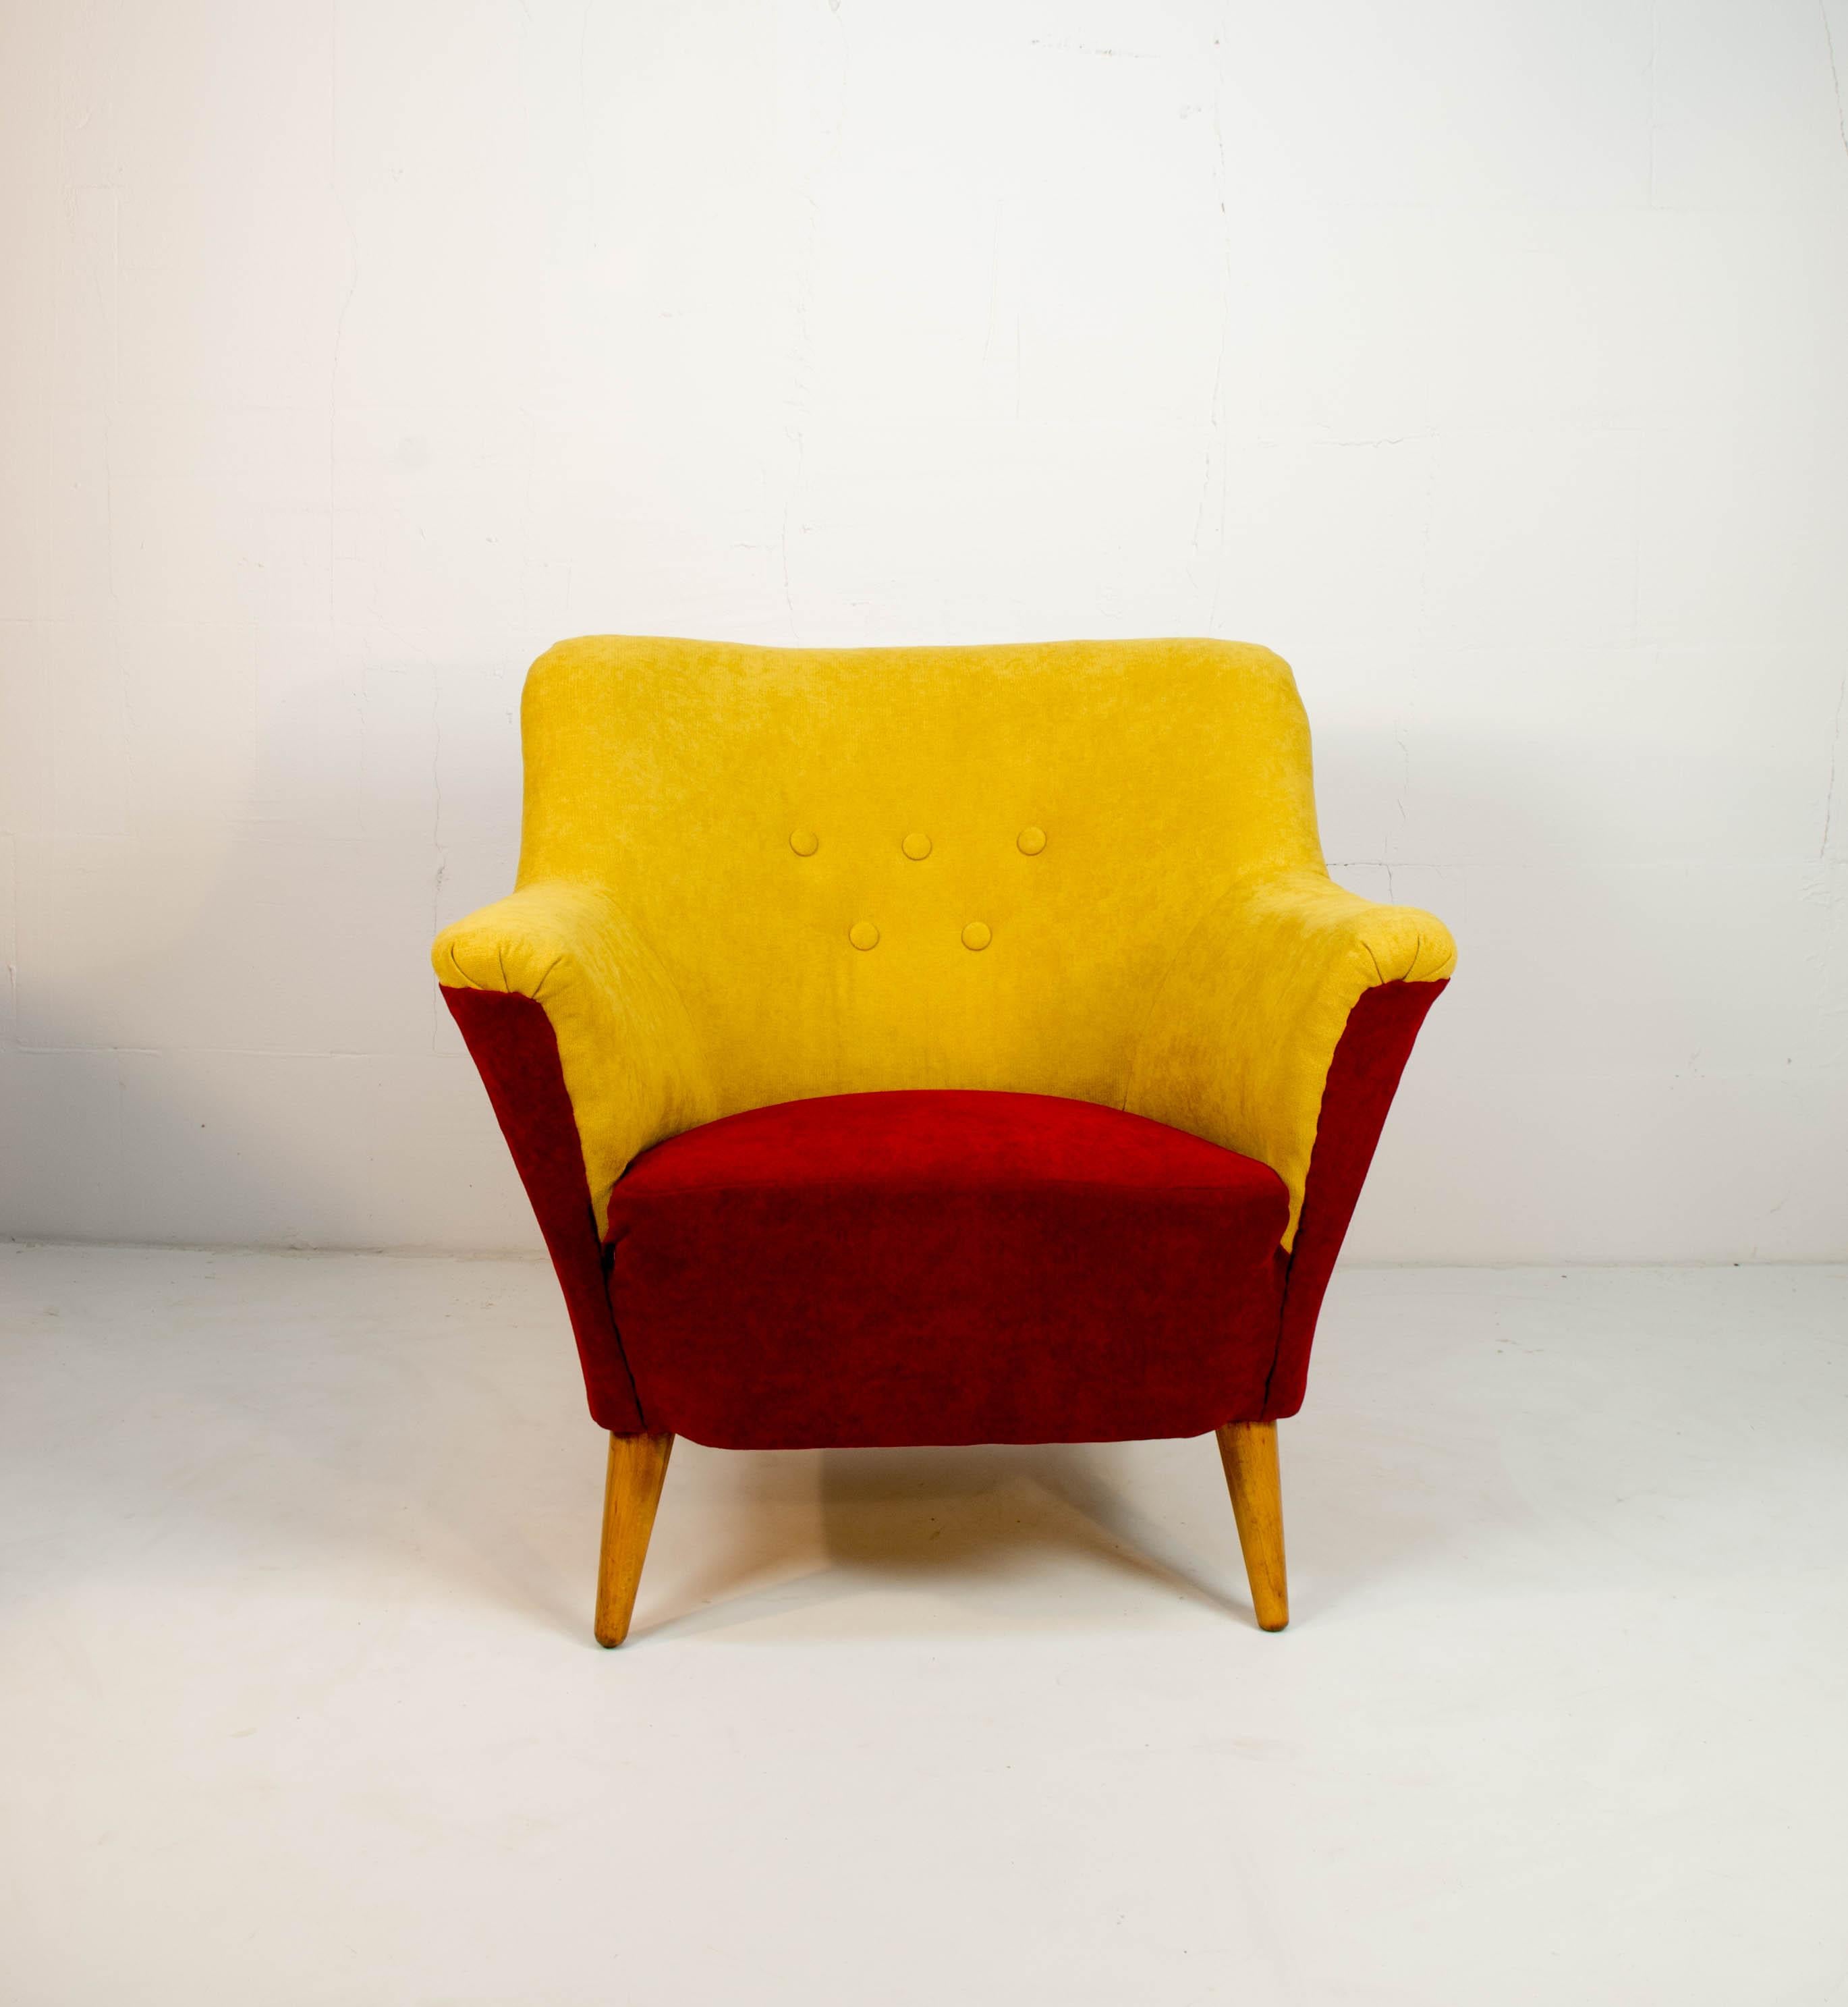 Completely restored and newly upholstered armchair from 1930s. Very comfortable.